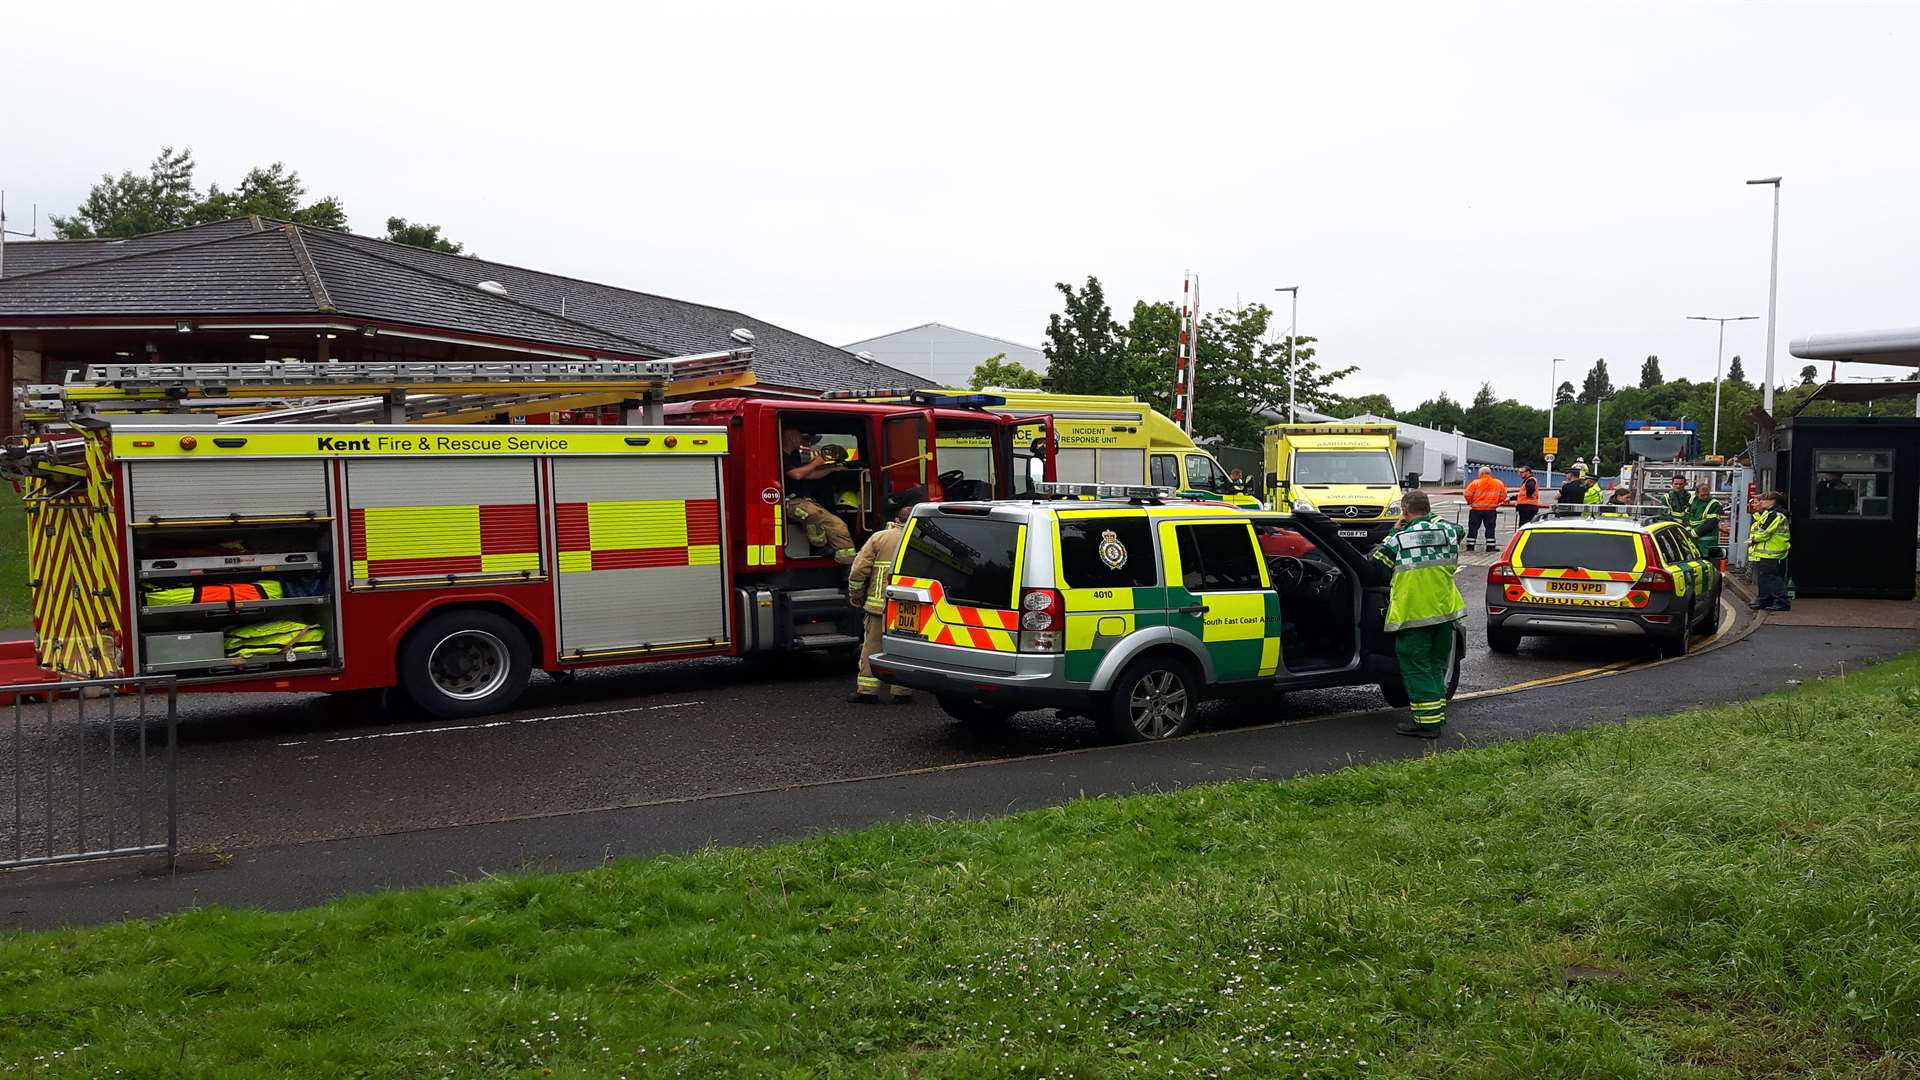 Emergency services were called to the chemical incident